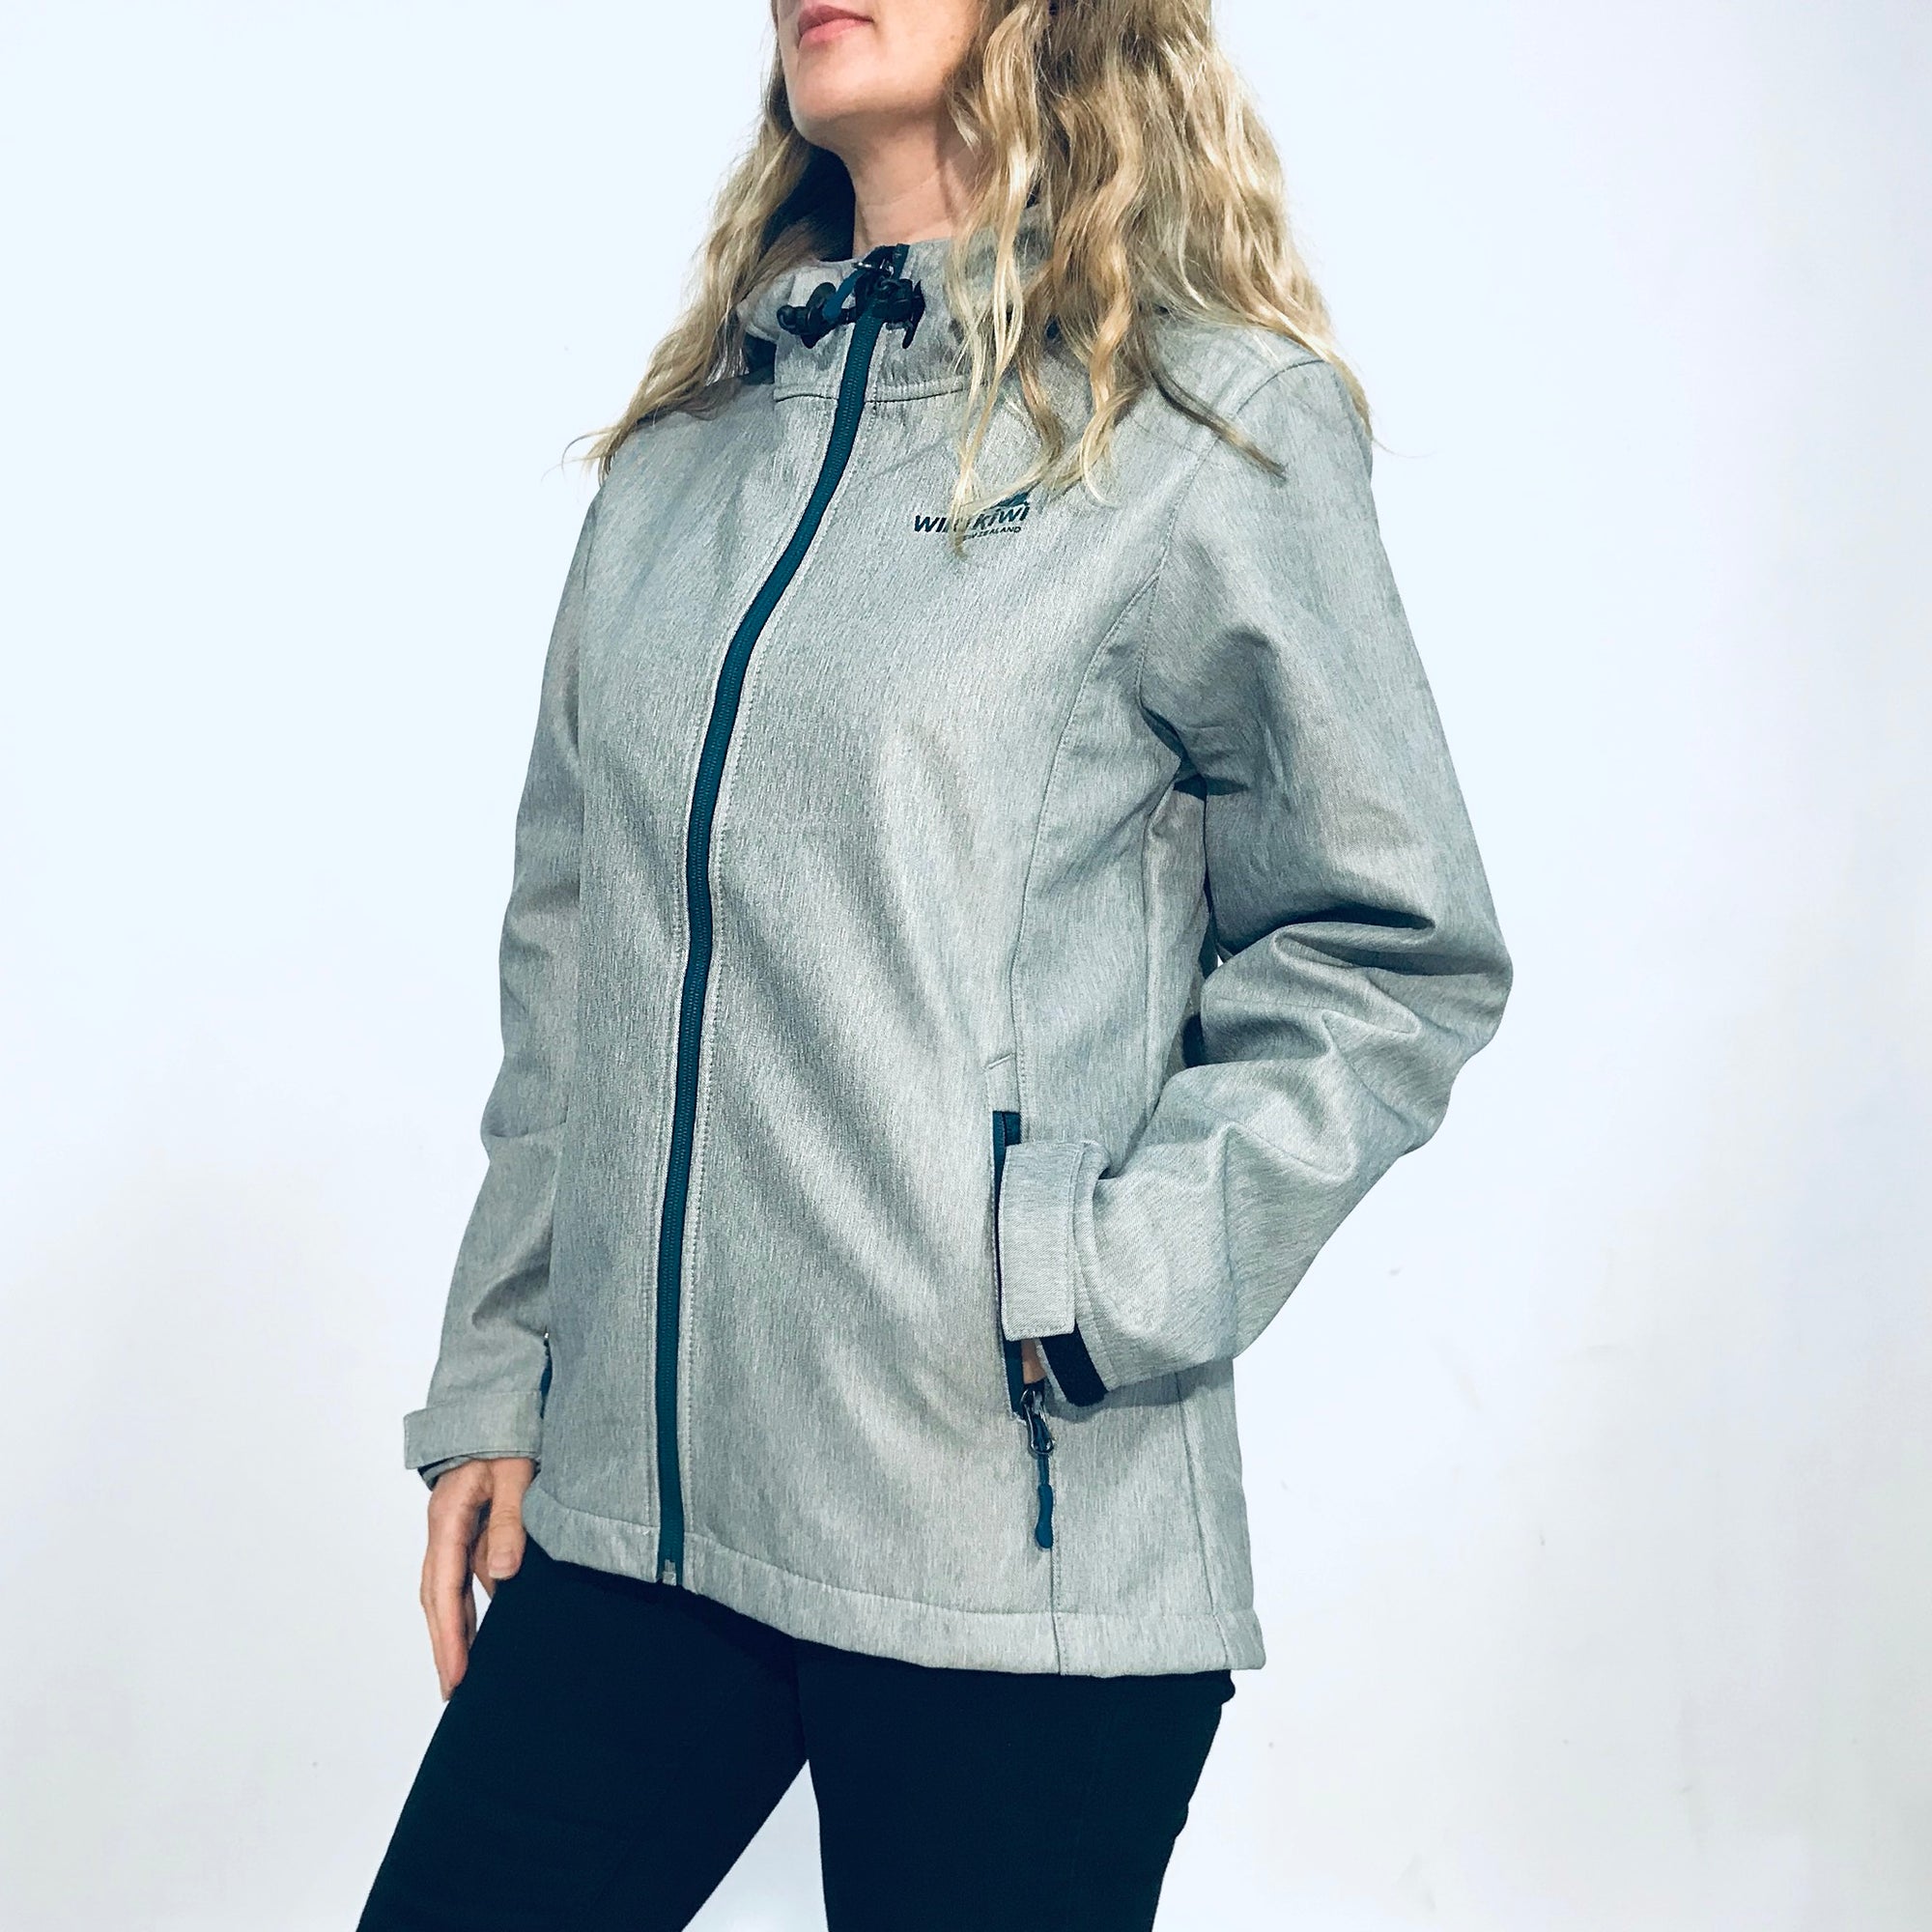 Women&#39;s grey hooded soft shell jacket with blue lining and zips. Water resistant tech shell. www.wild-kiwi.co.nz